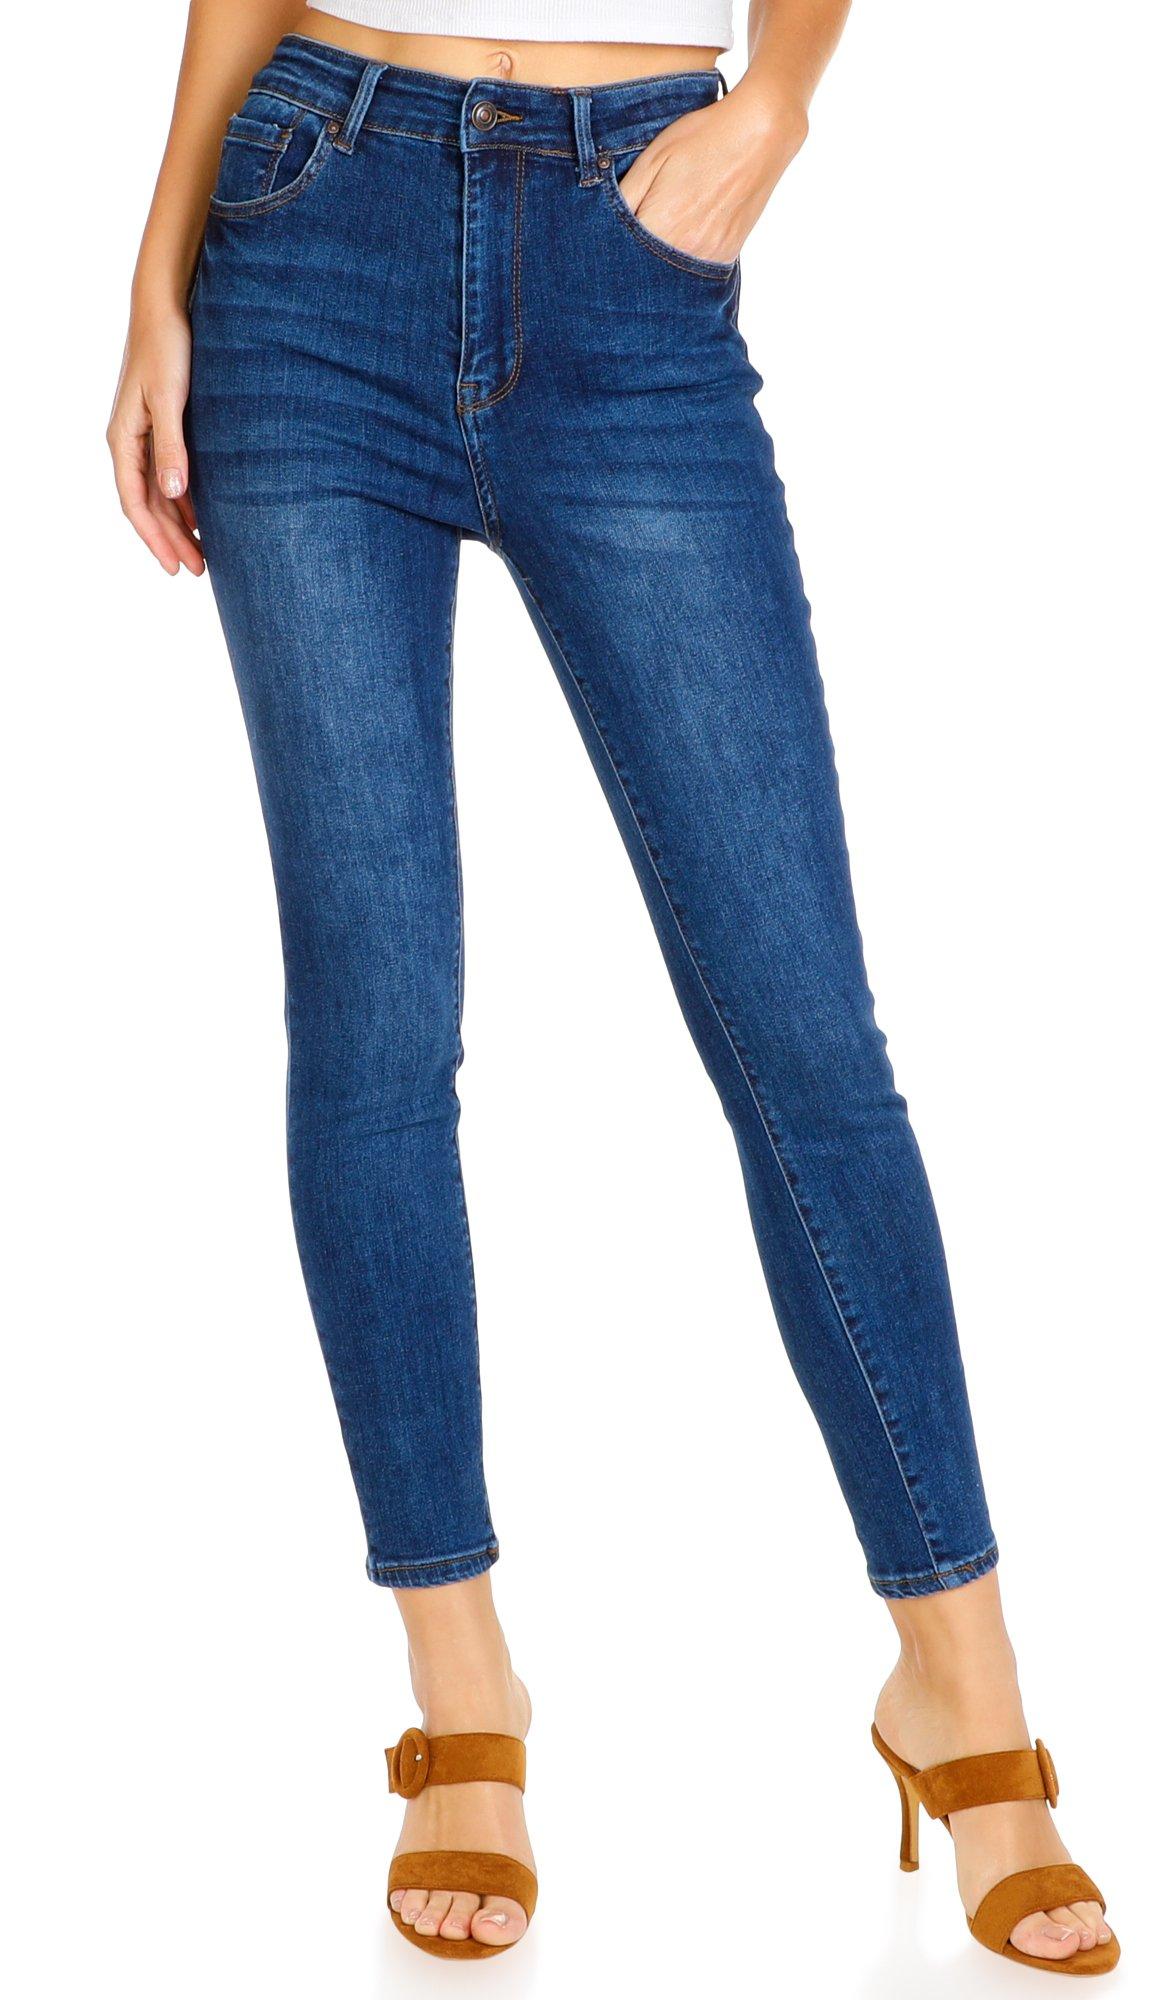 Juniors Skinny Ankle Jeans